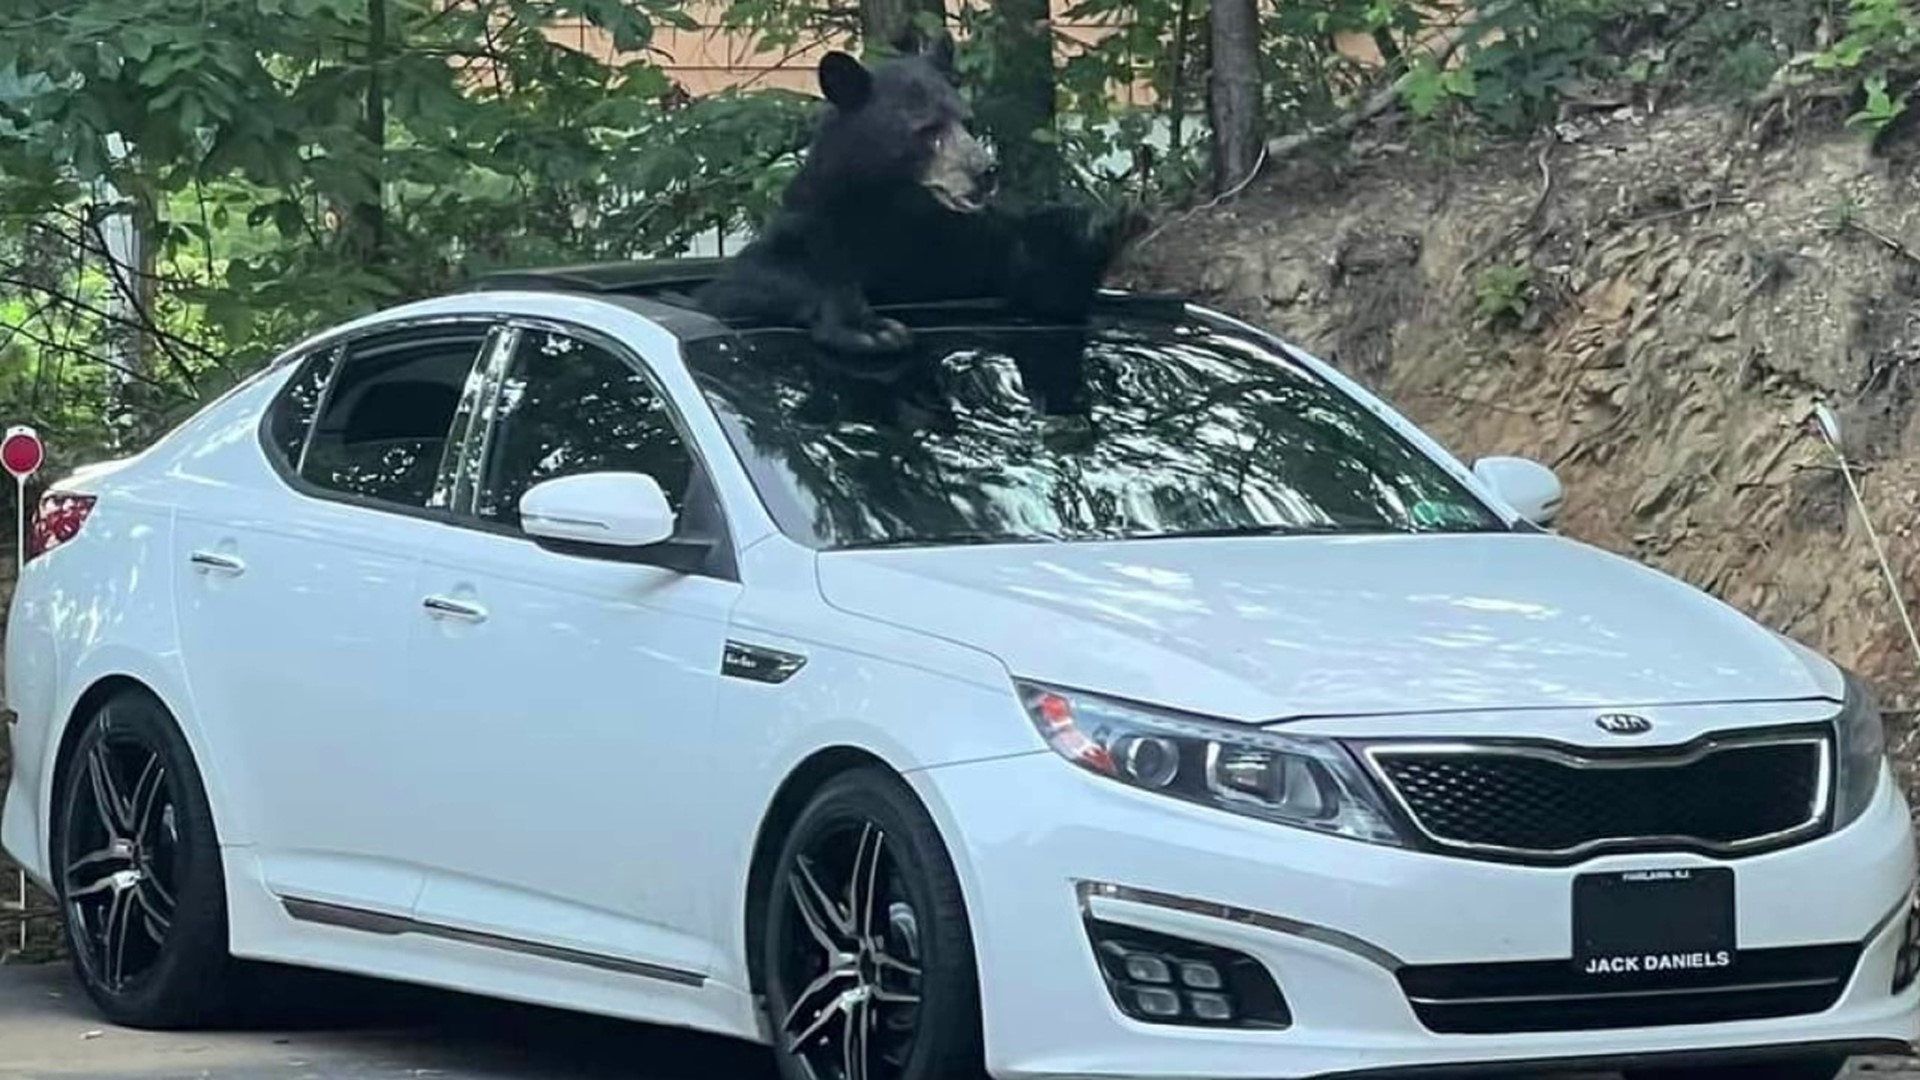 Little did this family know, a furry peanut robber was on the loose in Gatlinburg, Tennessee.